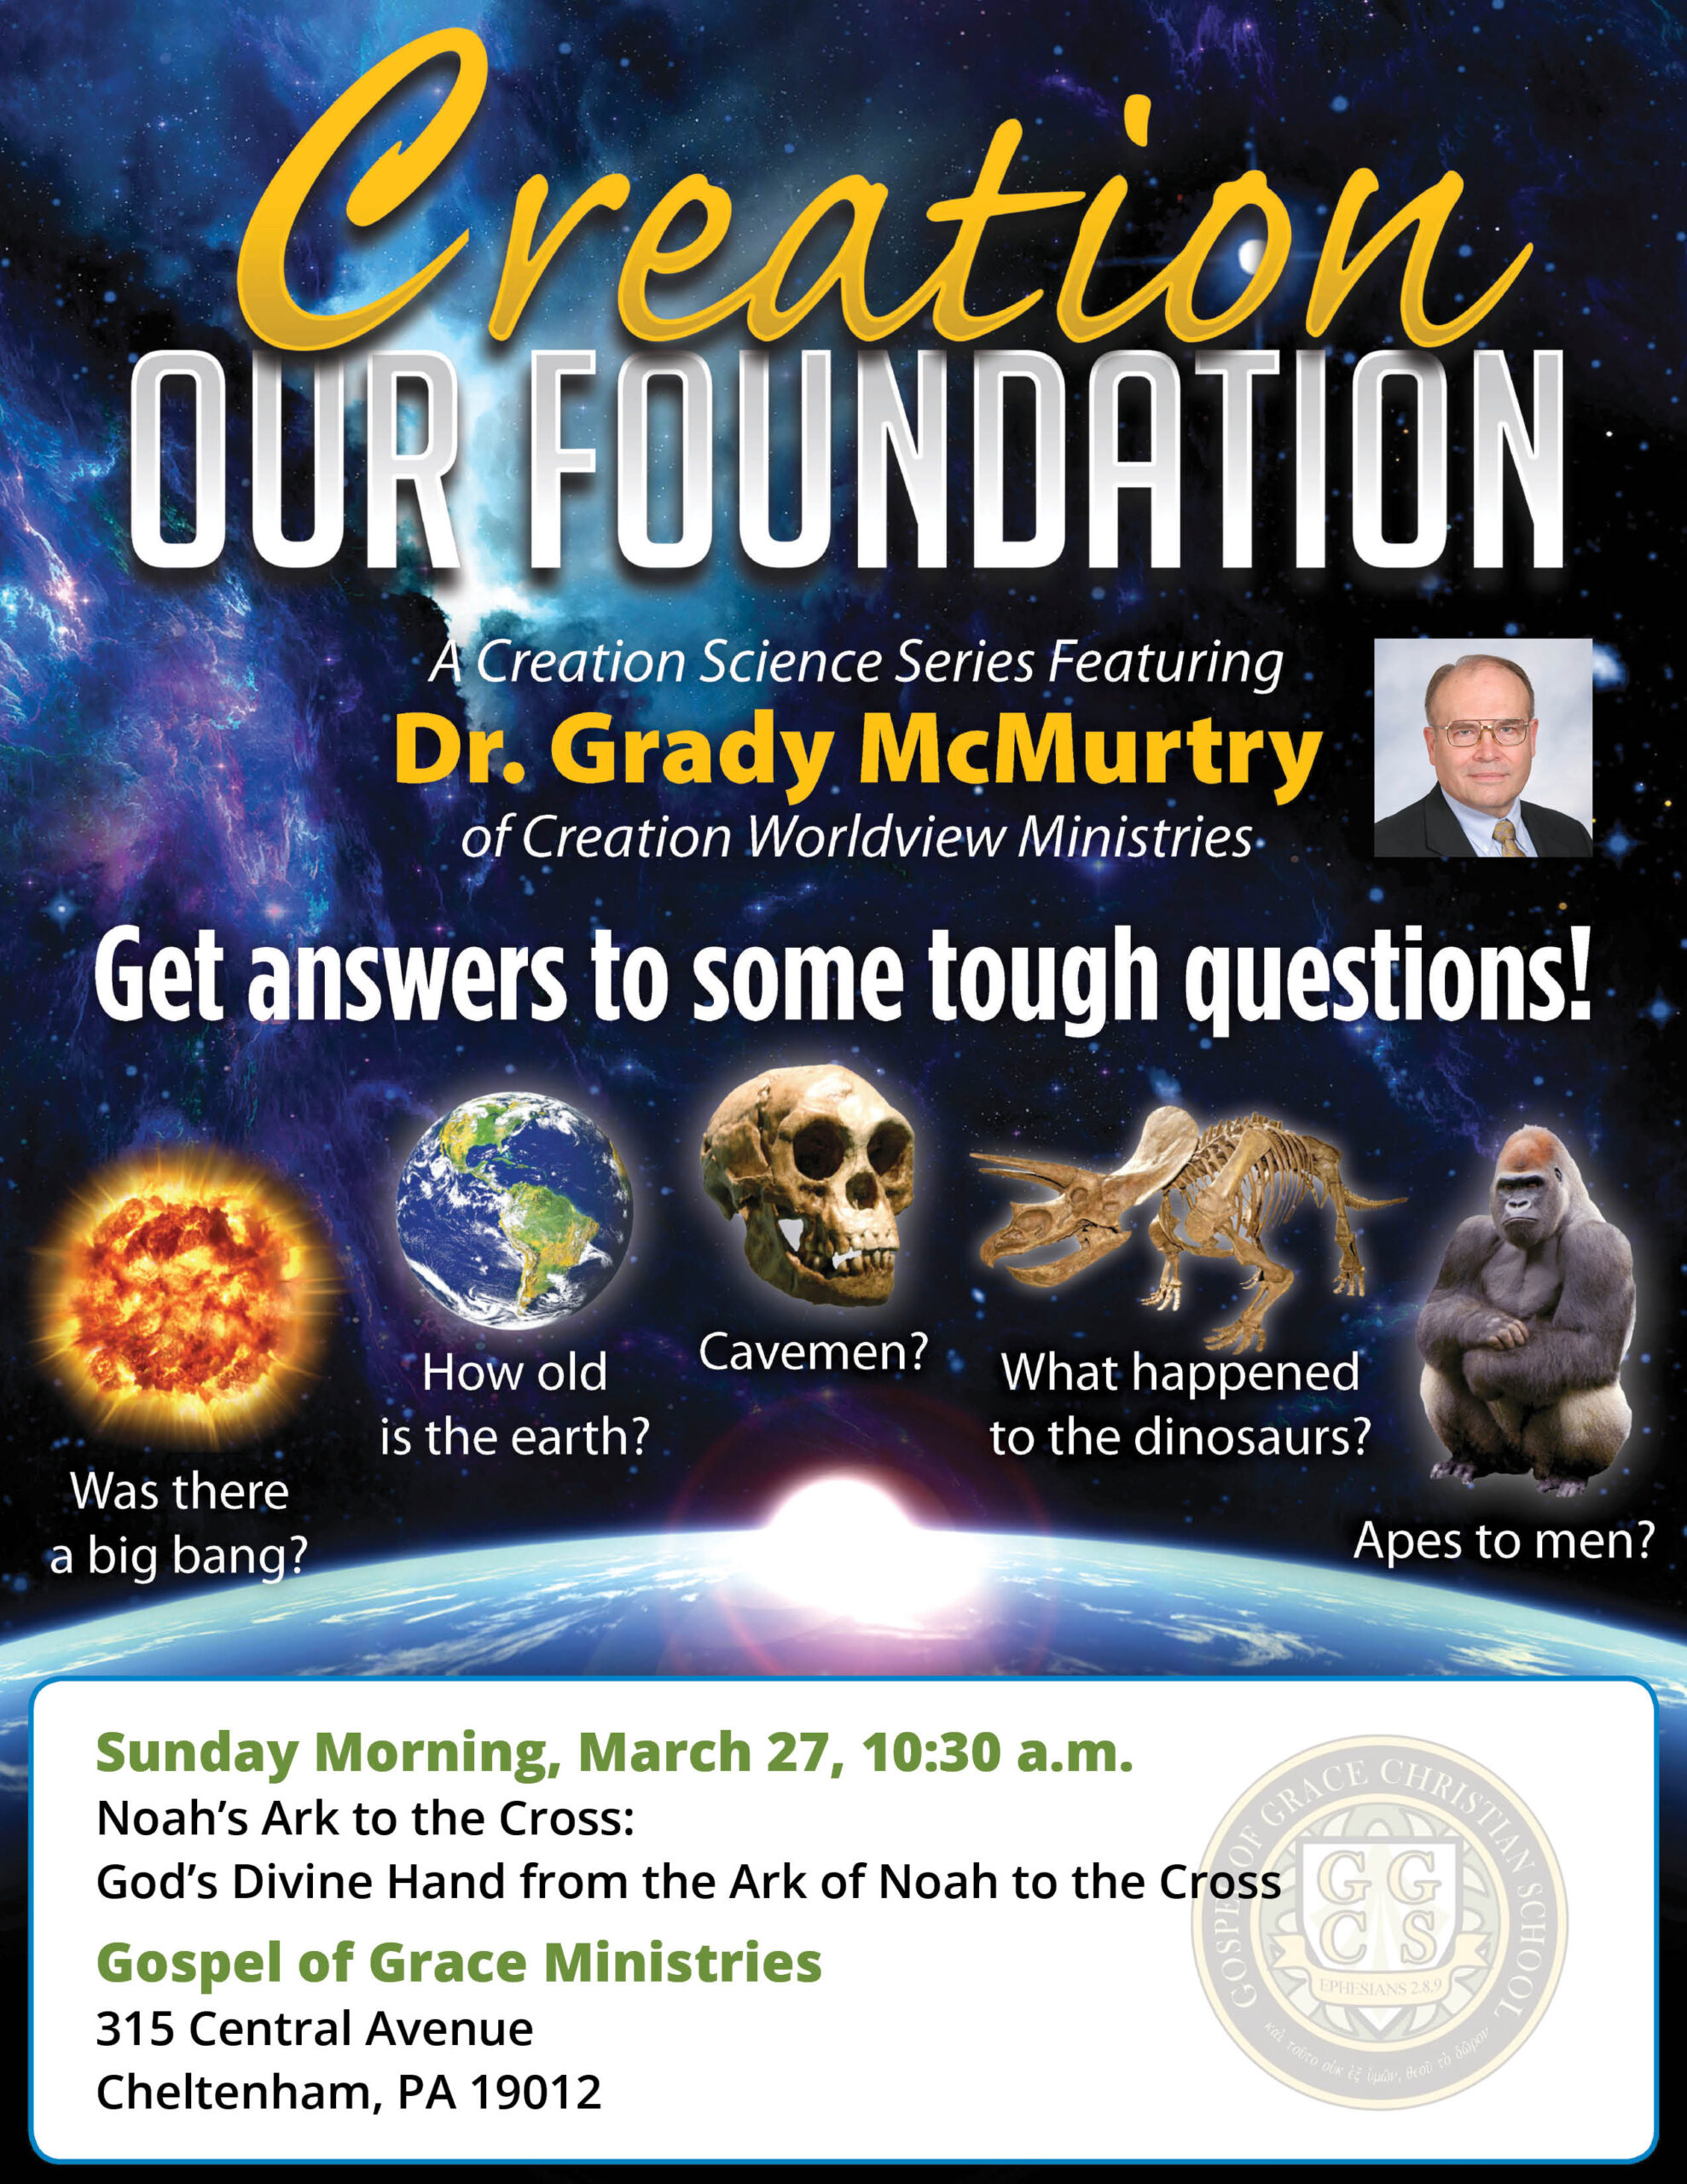 Creation worldview poster for event at Gospel of Grace Ministries